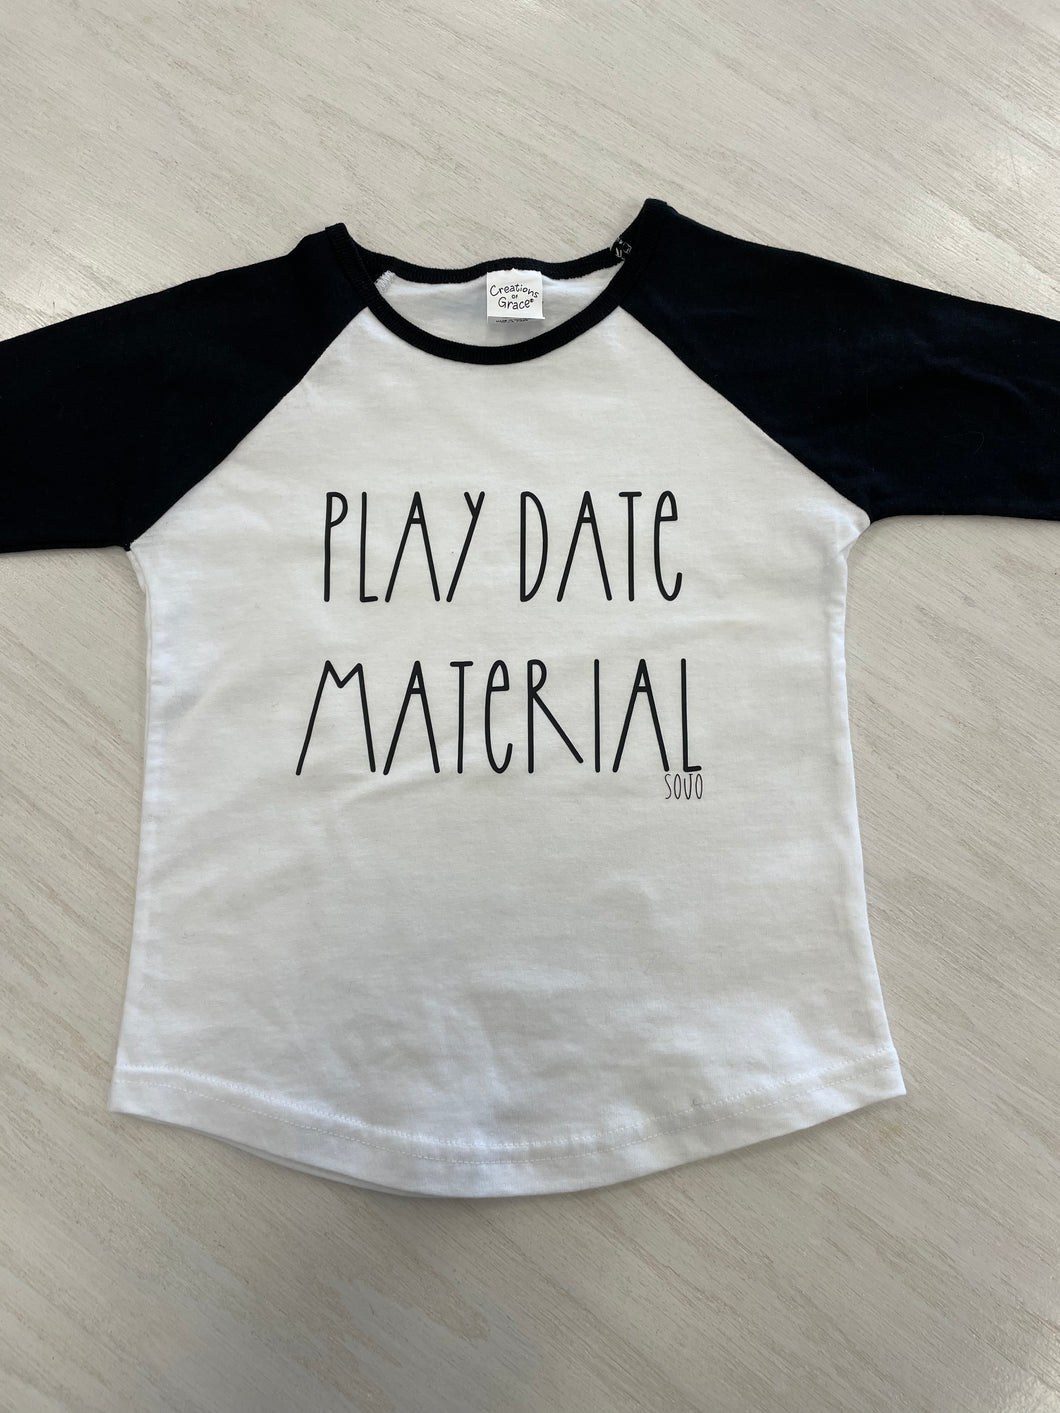 Black and white baseball style shirt with wording 